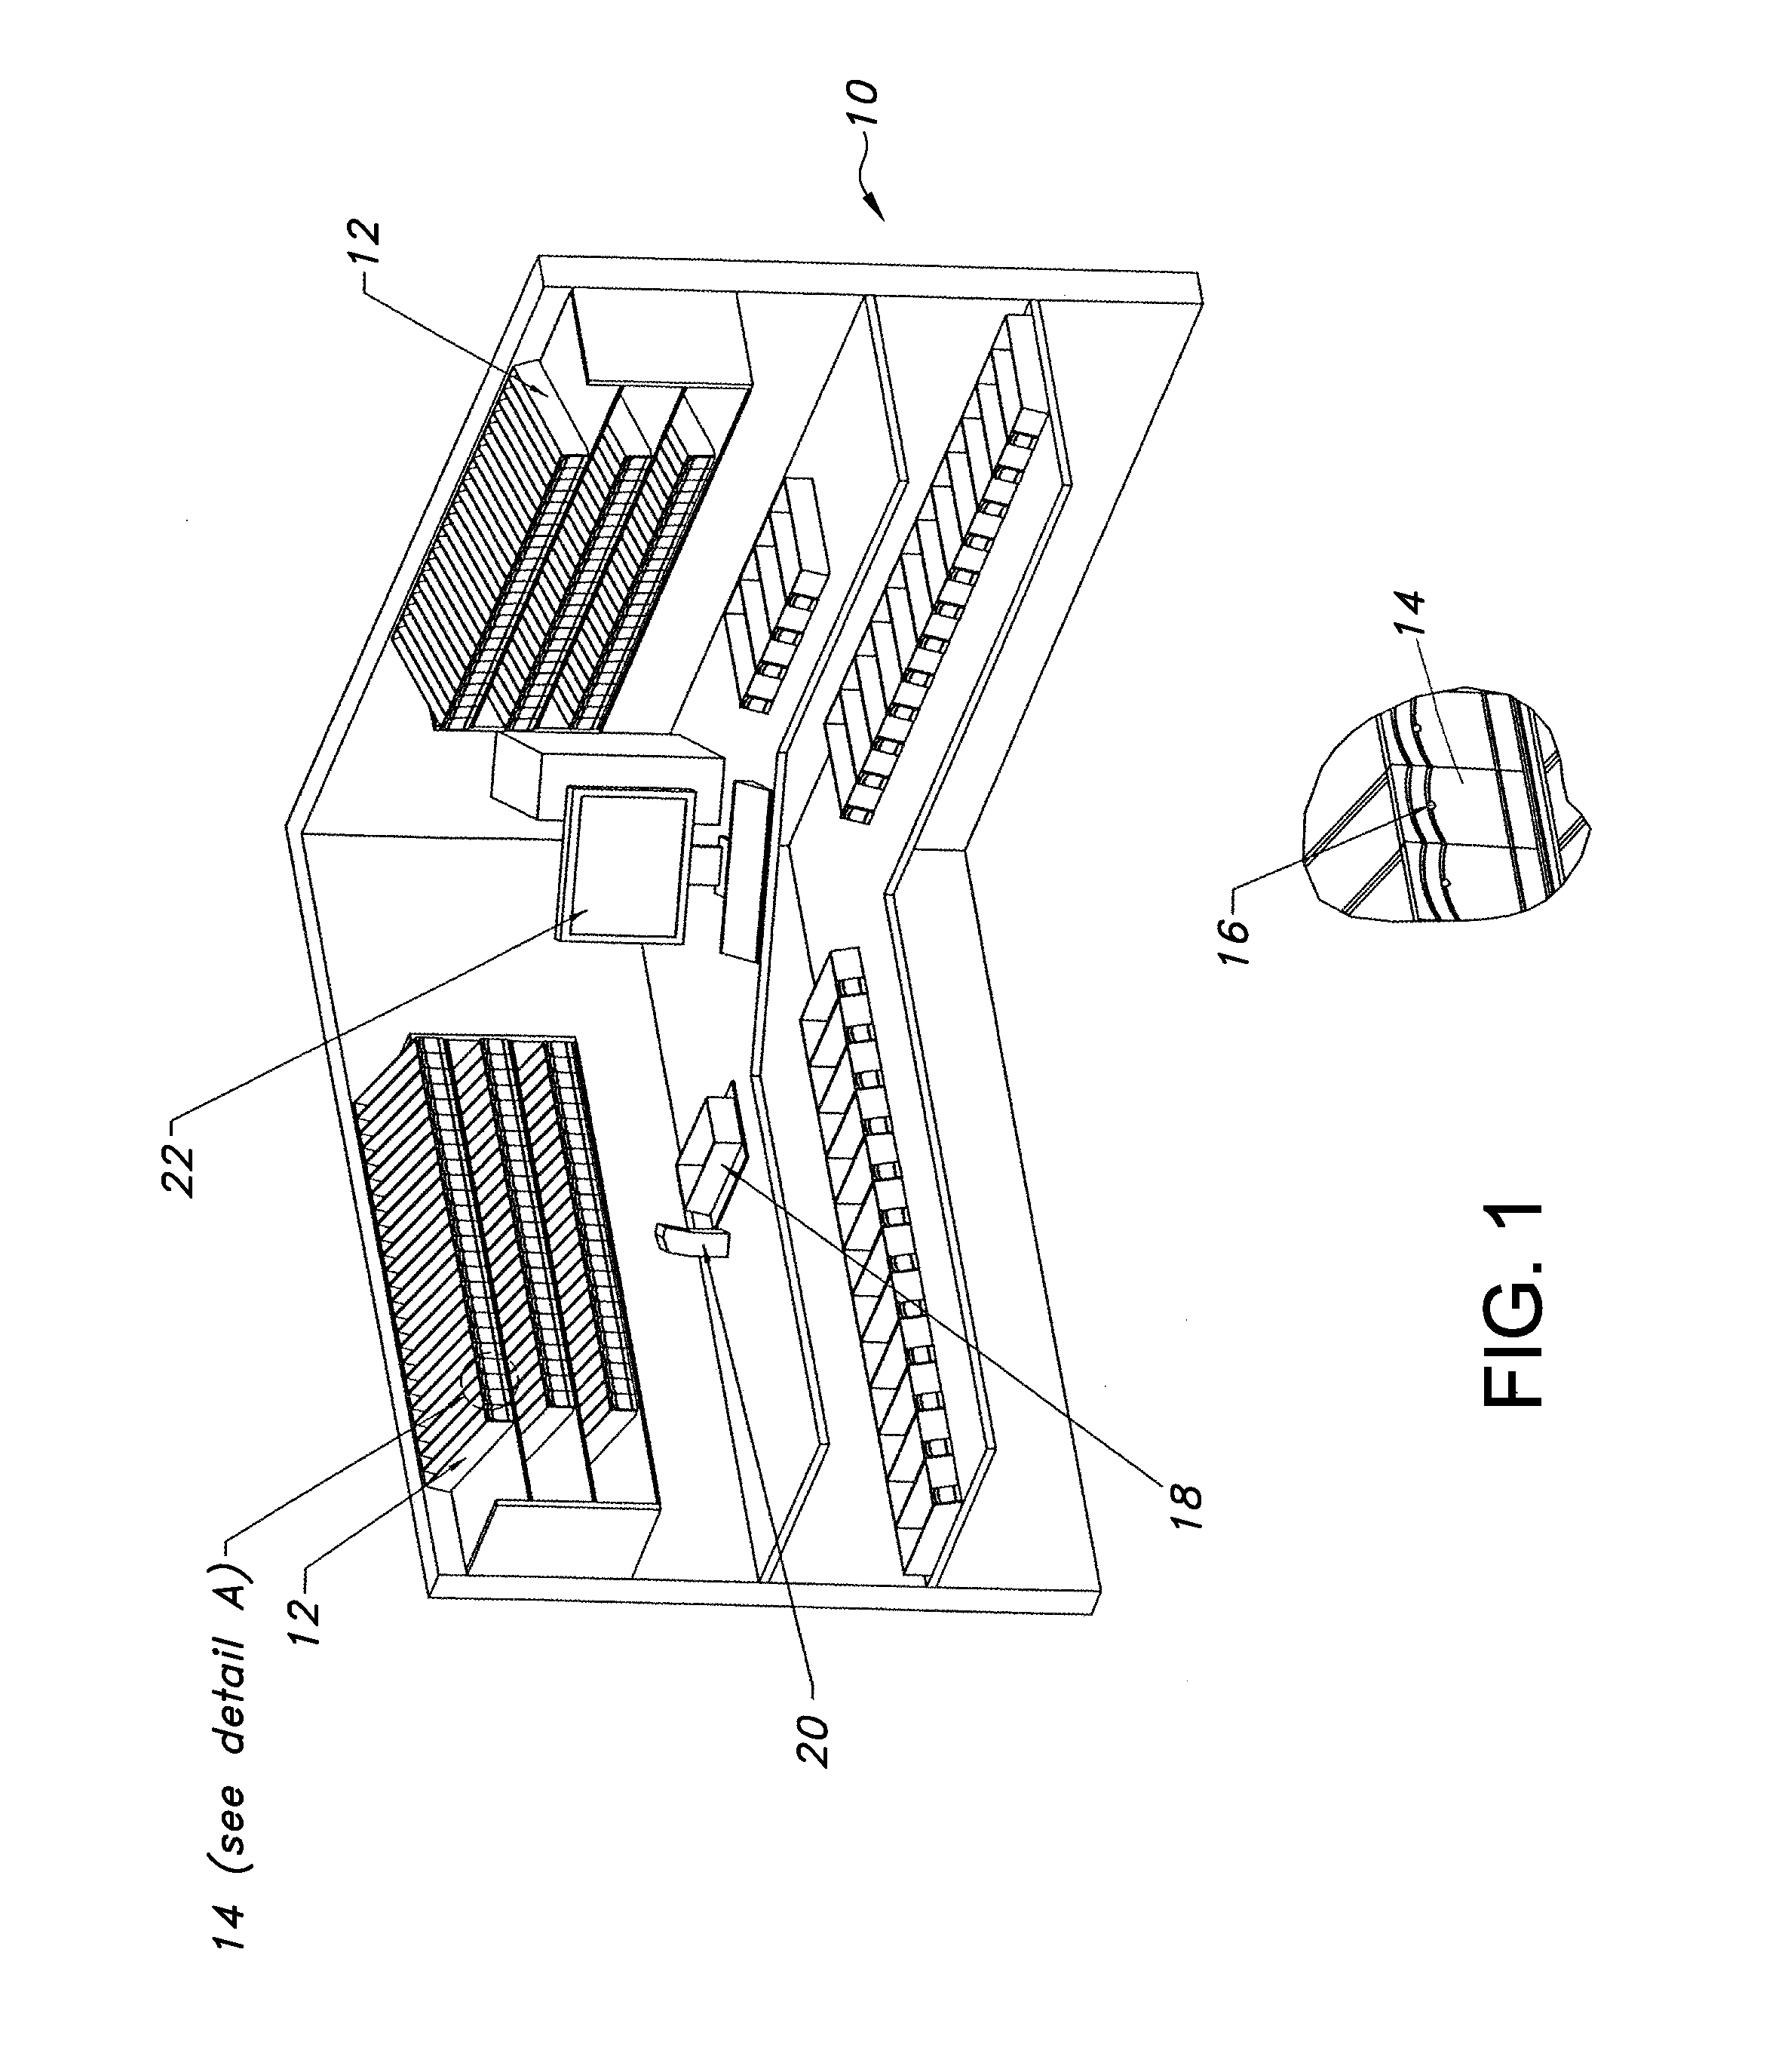 Inventory management system using RFID tags to aid in dispensing and restocking inventory